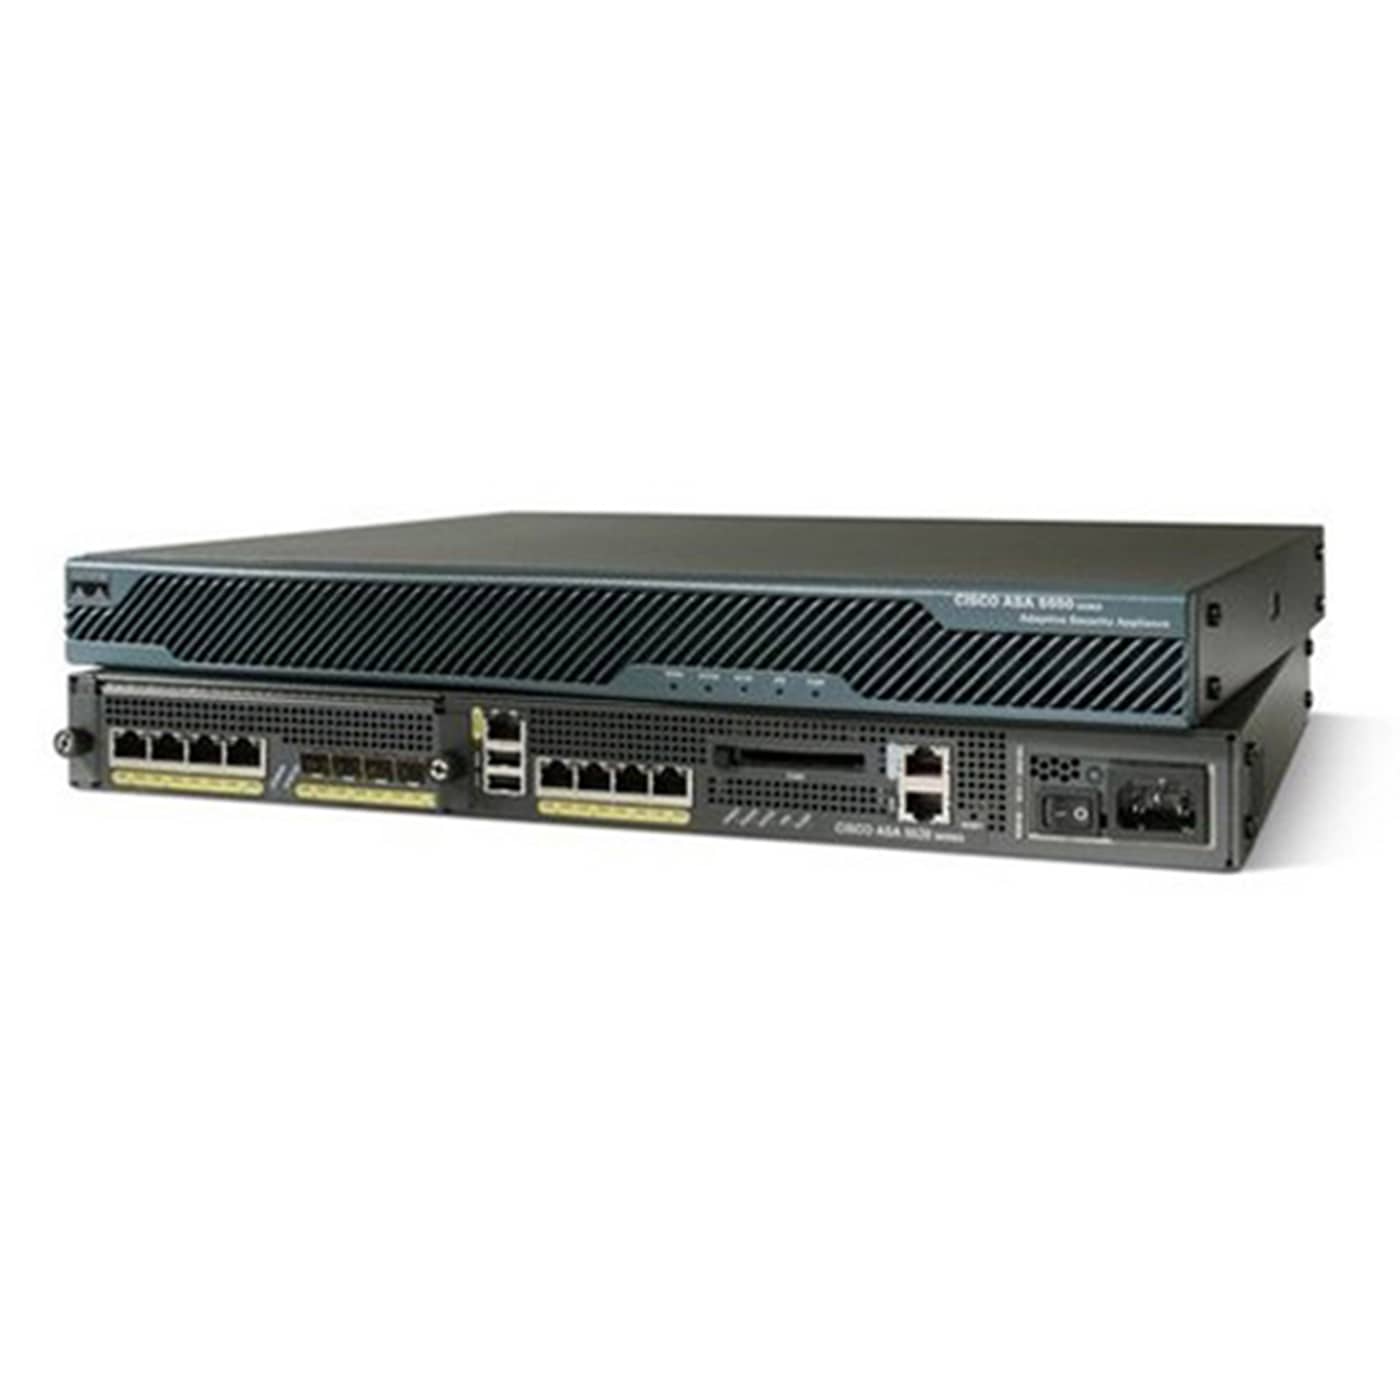 Refurbished and Used Cisco Router 2901